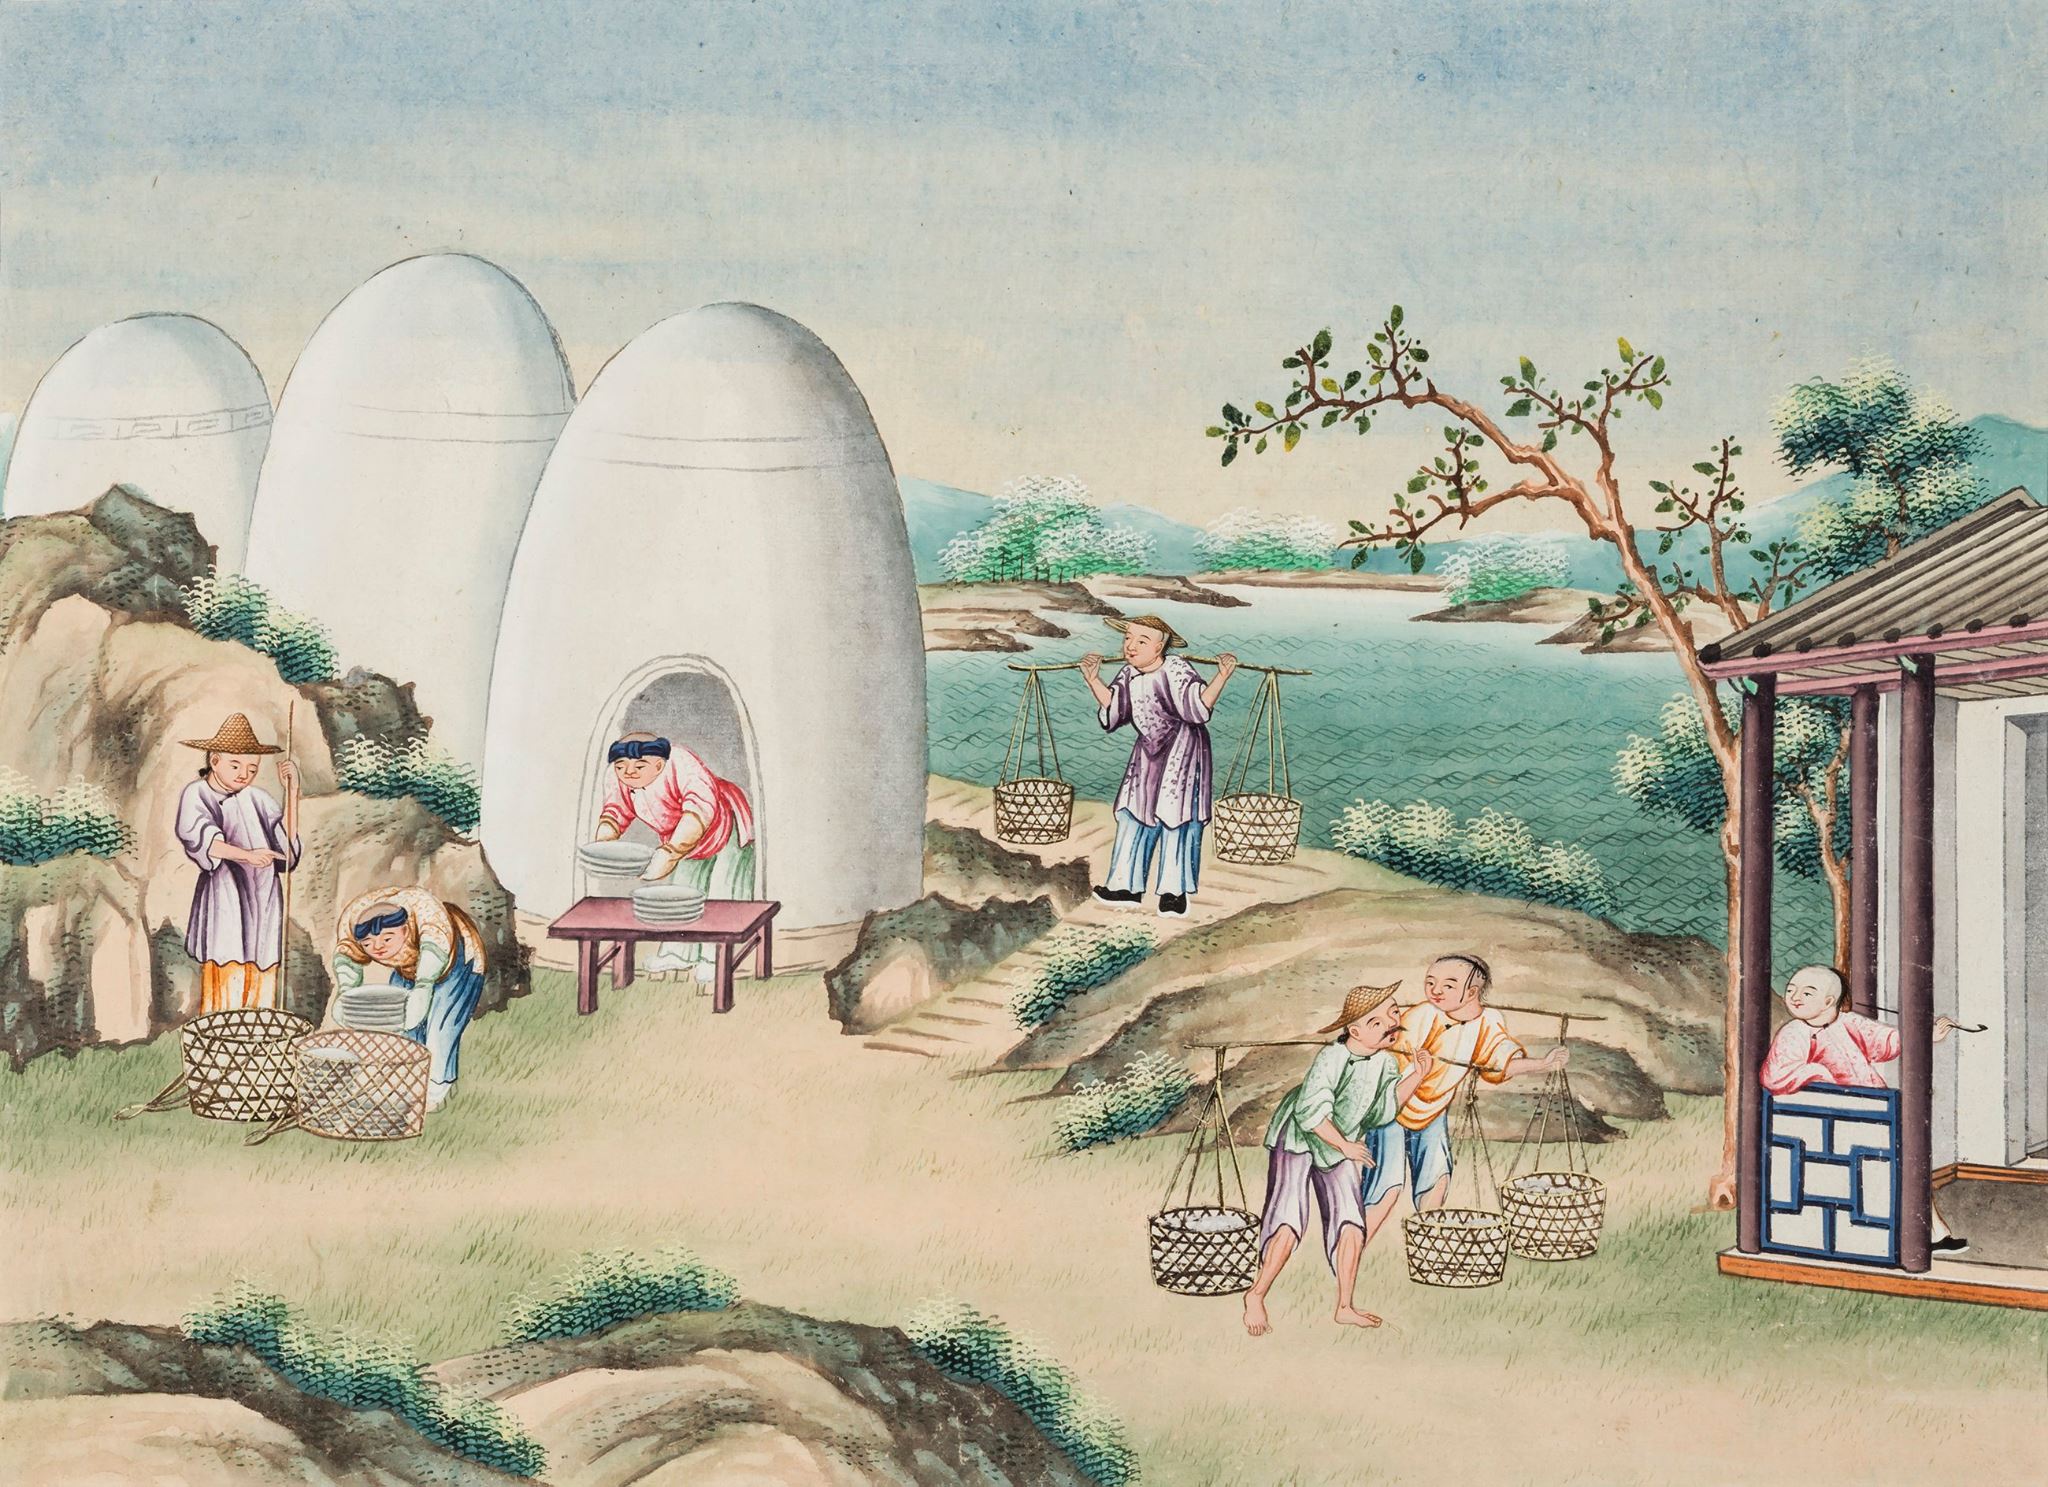 The process of porcelain production. Guangzhou, China, c. 1810. Gift of Lindy Barrow, G13.2.1-12.